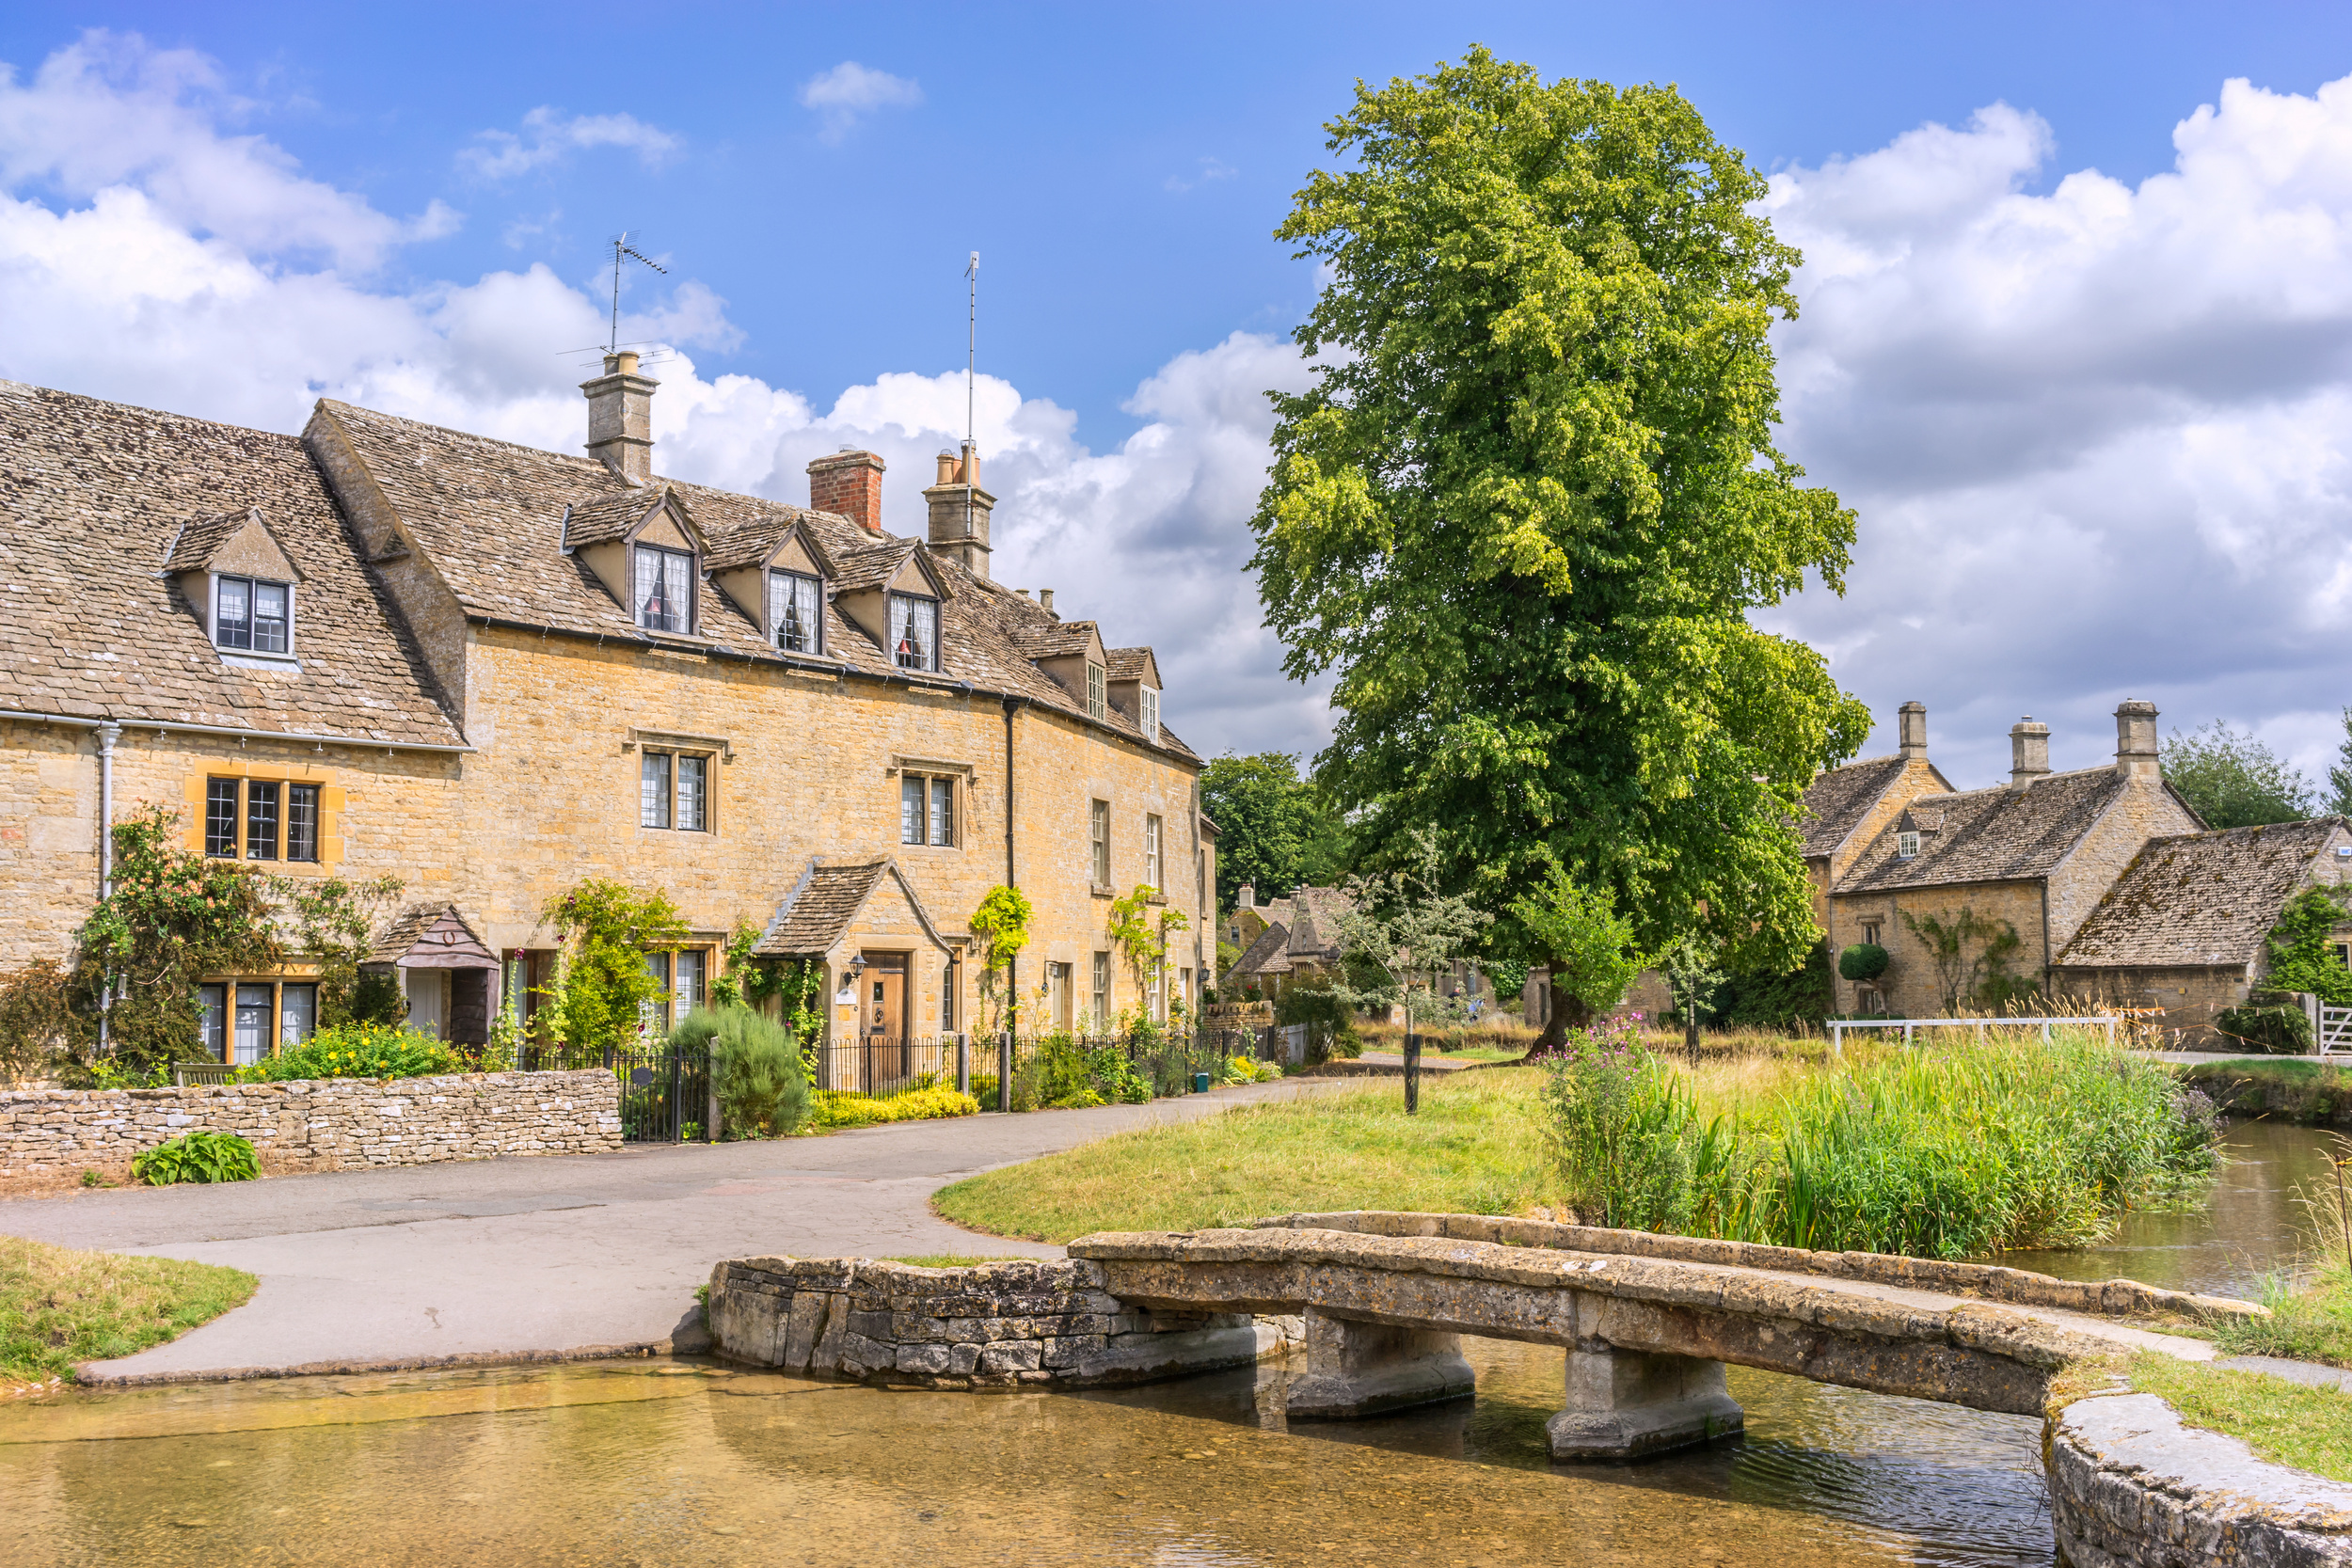 <p>If one region on this list is known for walking, it’s the Cotswolds. Well-trodden walking paths connect the numerous villages in the west of England. You can choose a single base and enjoy walking the English countryside to different adorable towns!</p><p>You may also like: <a href='https://www.yardbarker.com/lifestyle/articles/pumpkin_spice_recipes_and_treats_that_arent_pumpkin_spice_latte_1110723/s1__39335399'>Pumpkin spice recipes and treats that aren’t Pumpkin Spice Latte</a></p>